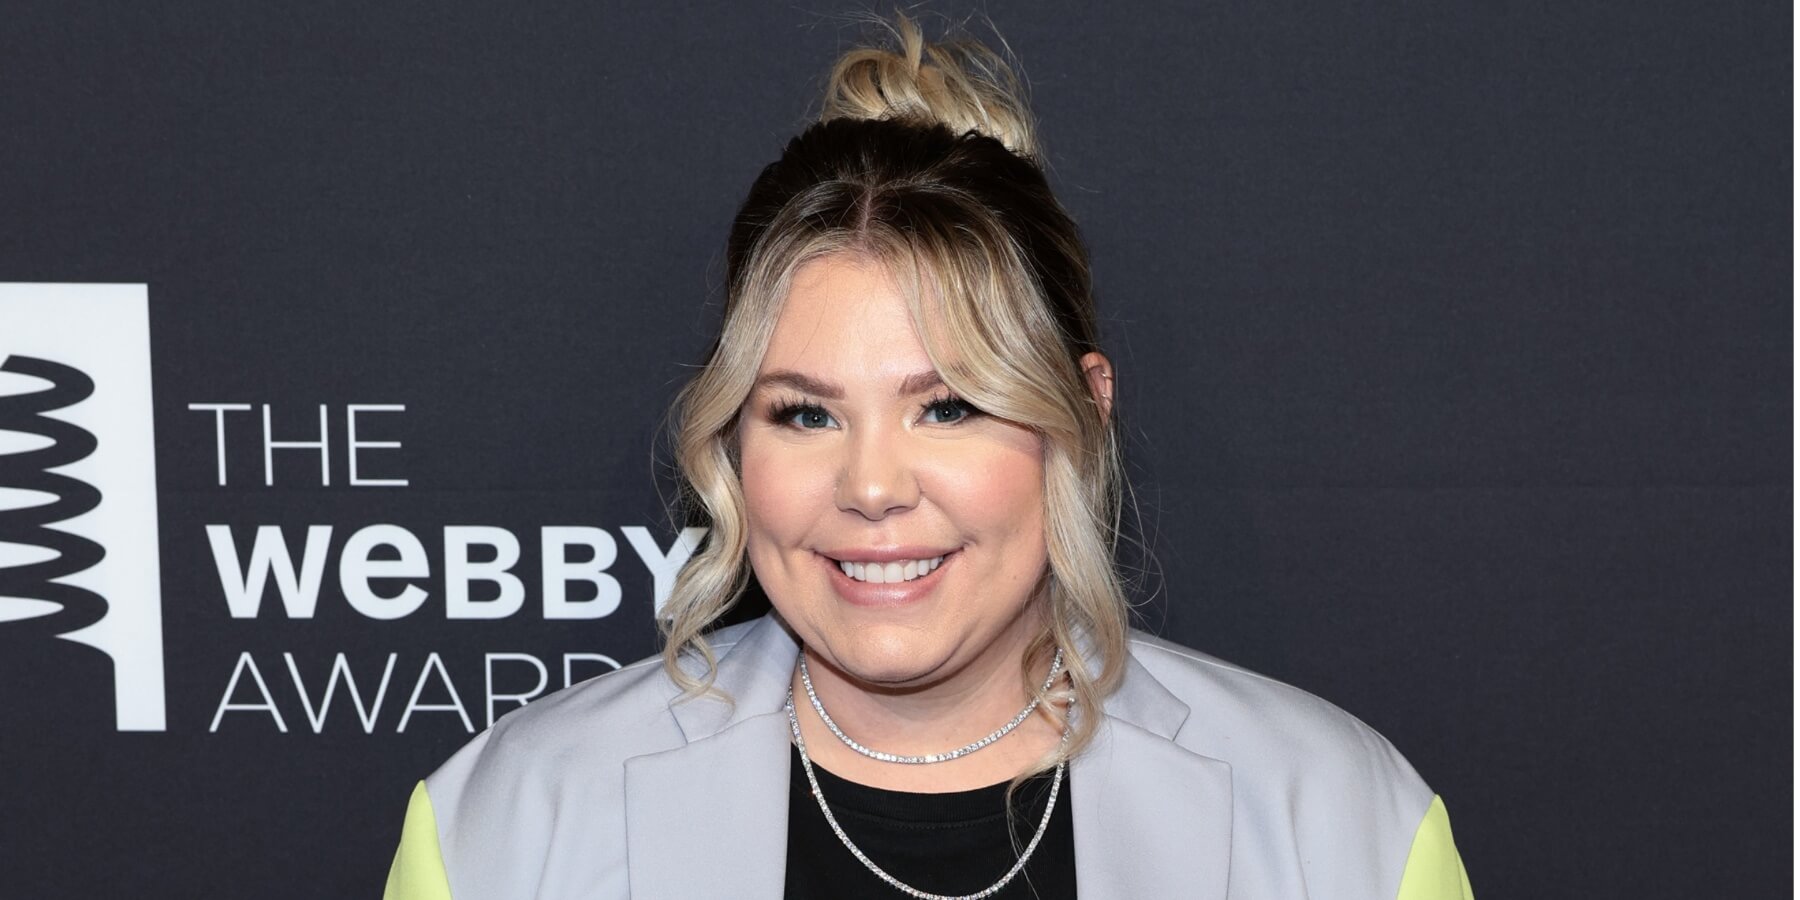 Kailyn Lowry Updates ‘Teen Mom 2’ Fans on House Plans, Teases a Future Project [Video]